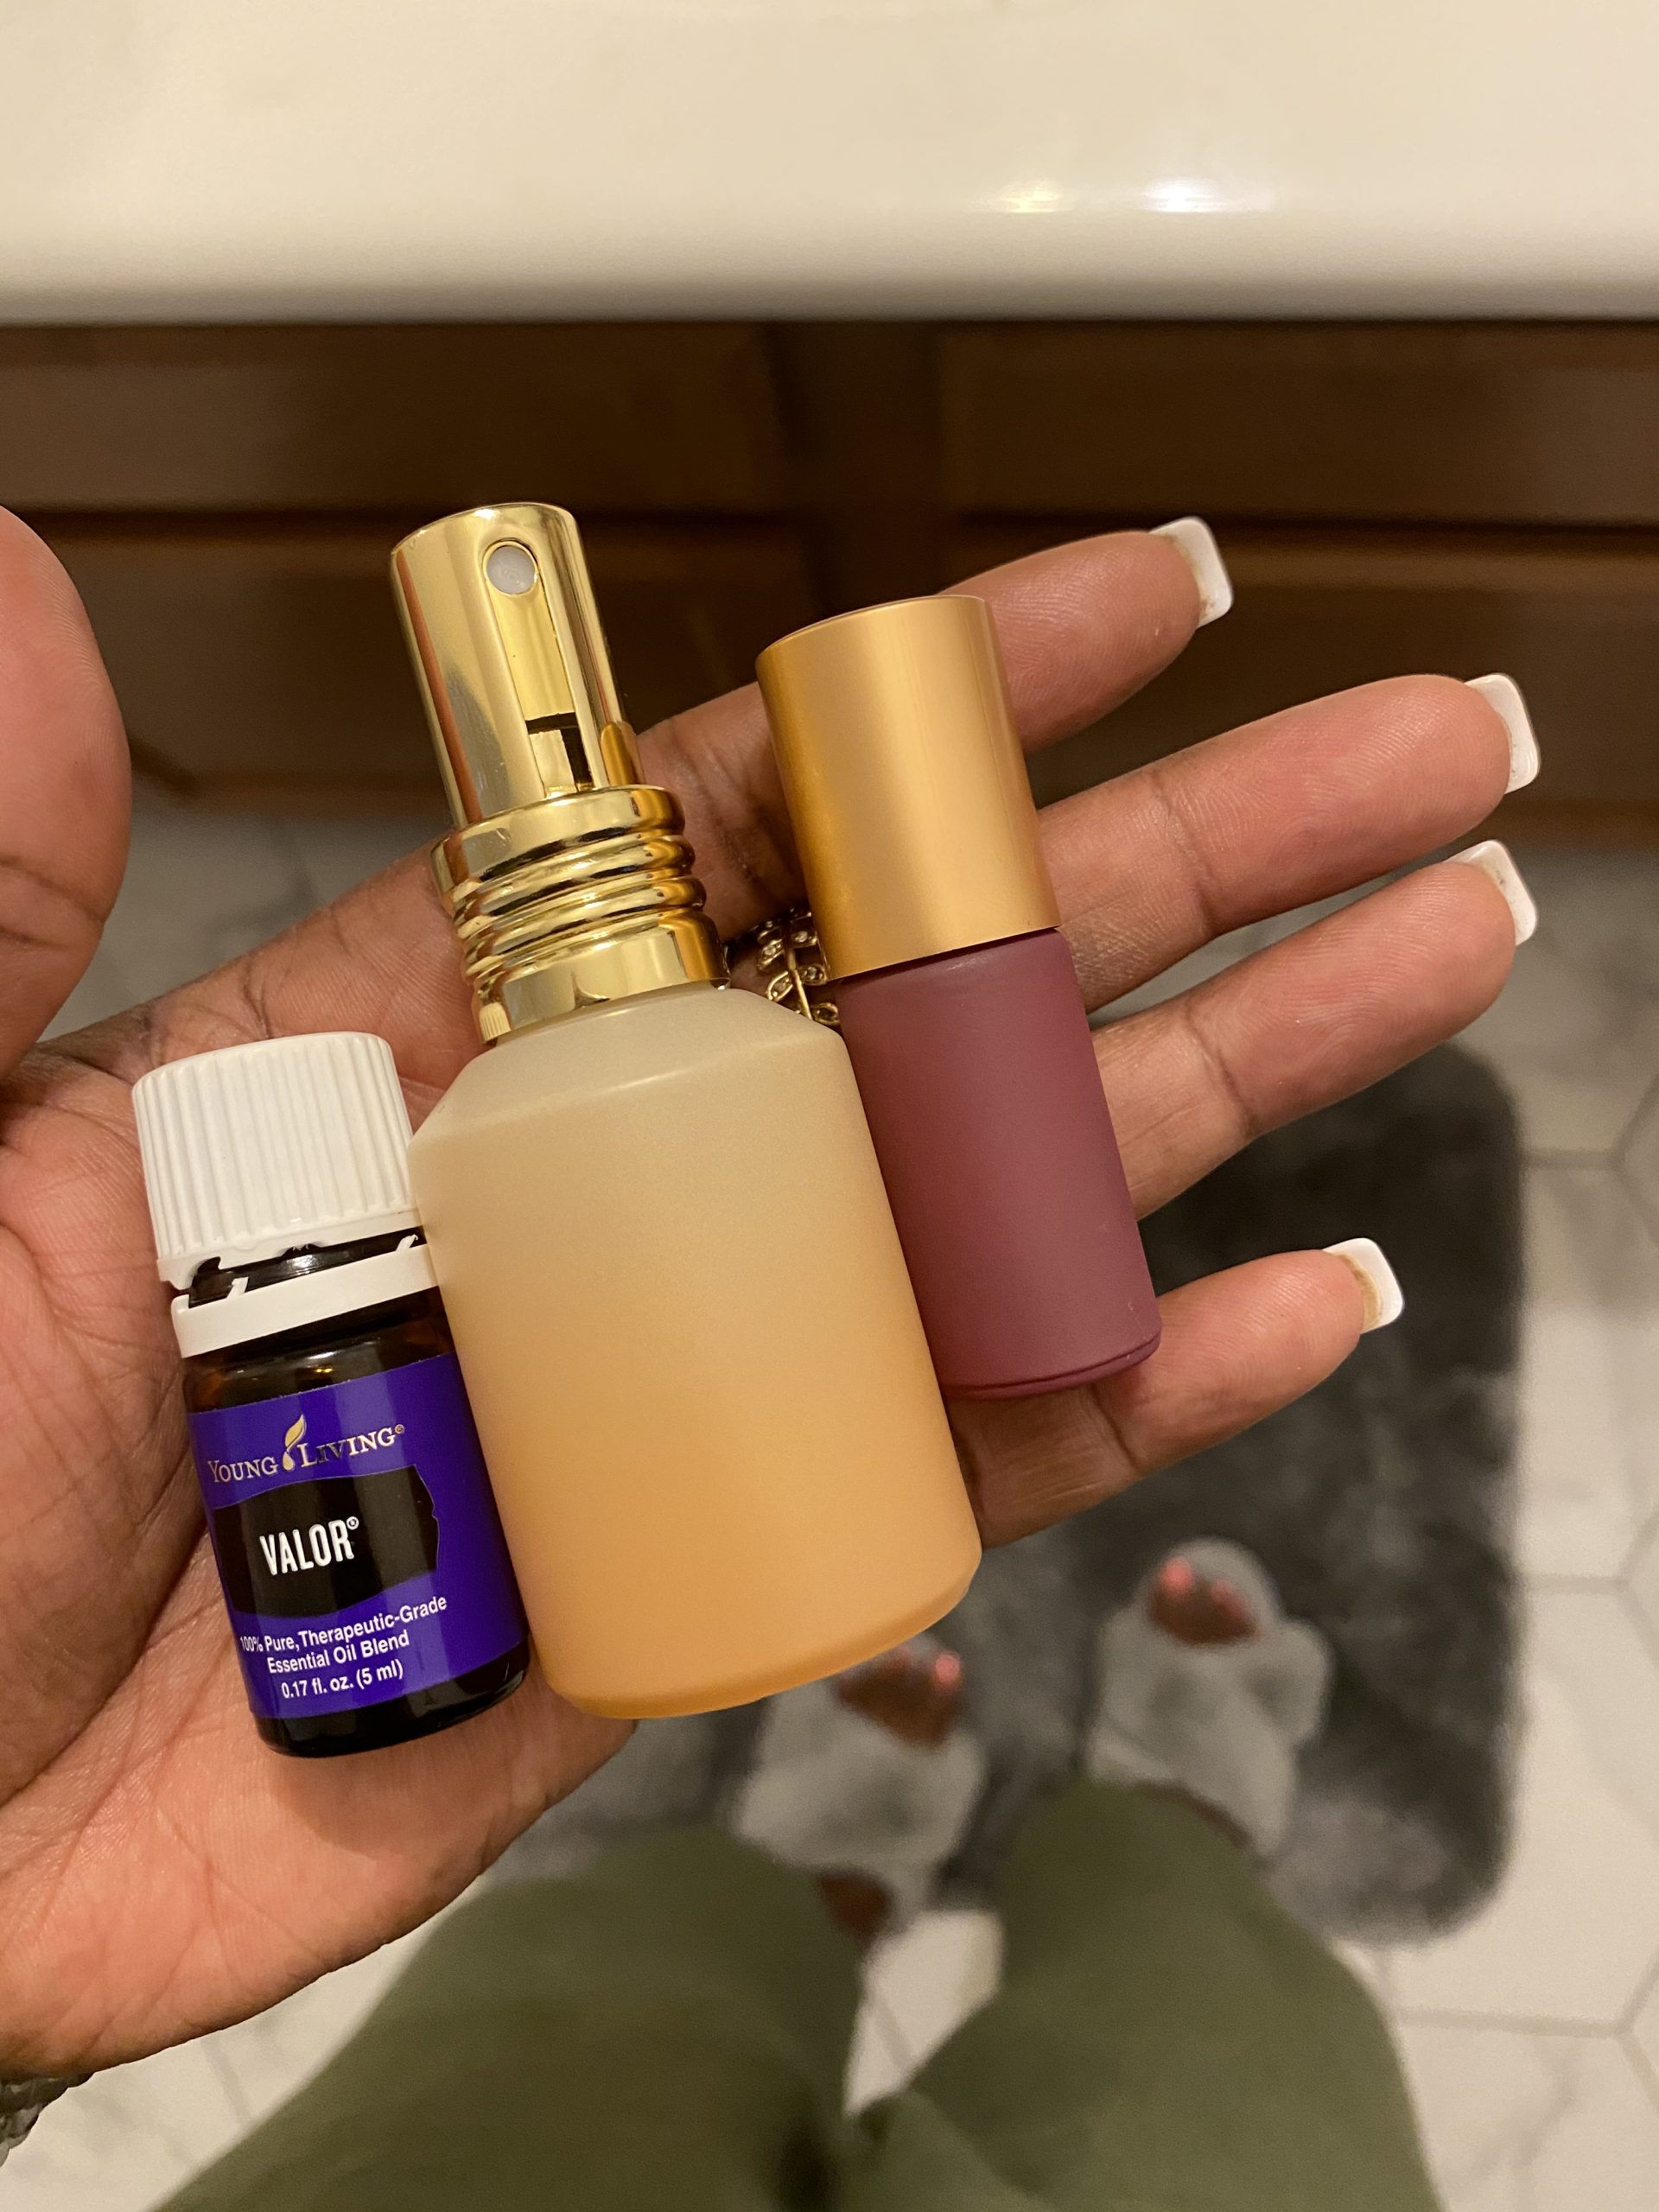 Chiazor Arah shares how she uses Young Living's popular blend, Valor, for emotional support by providing some beautiful essential oil recipes for us!